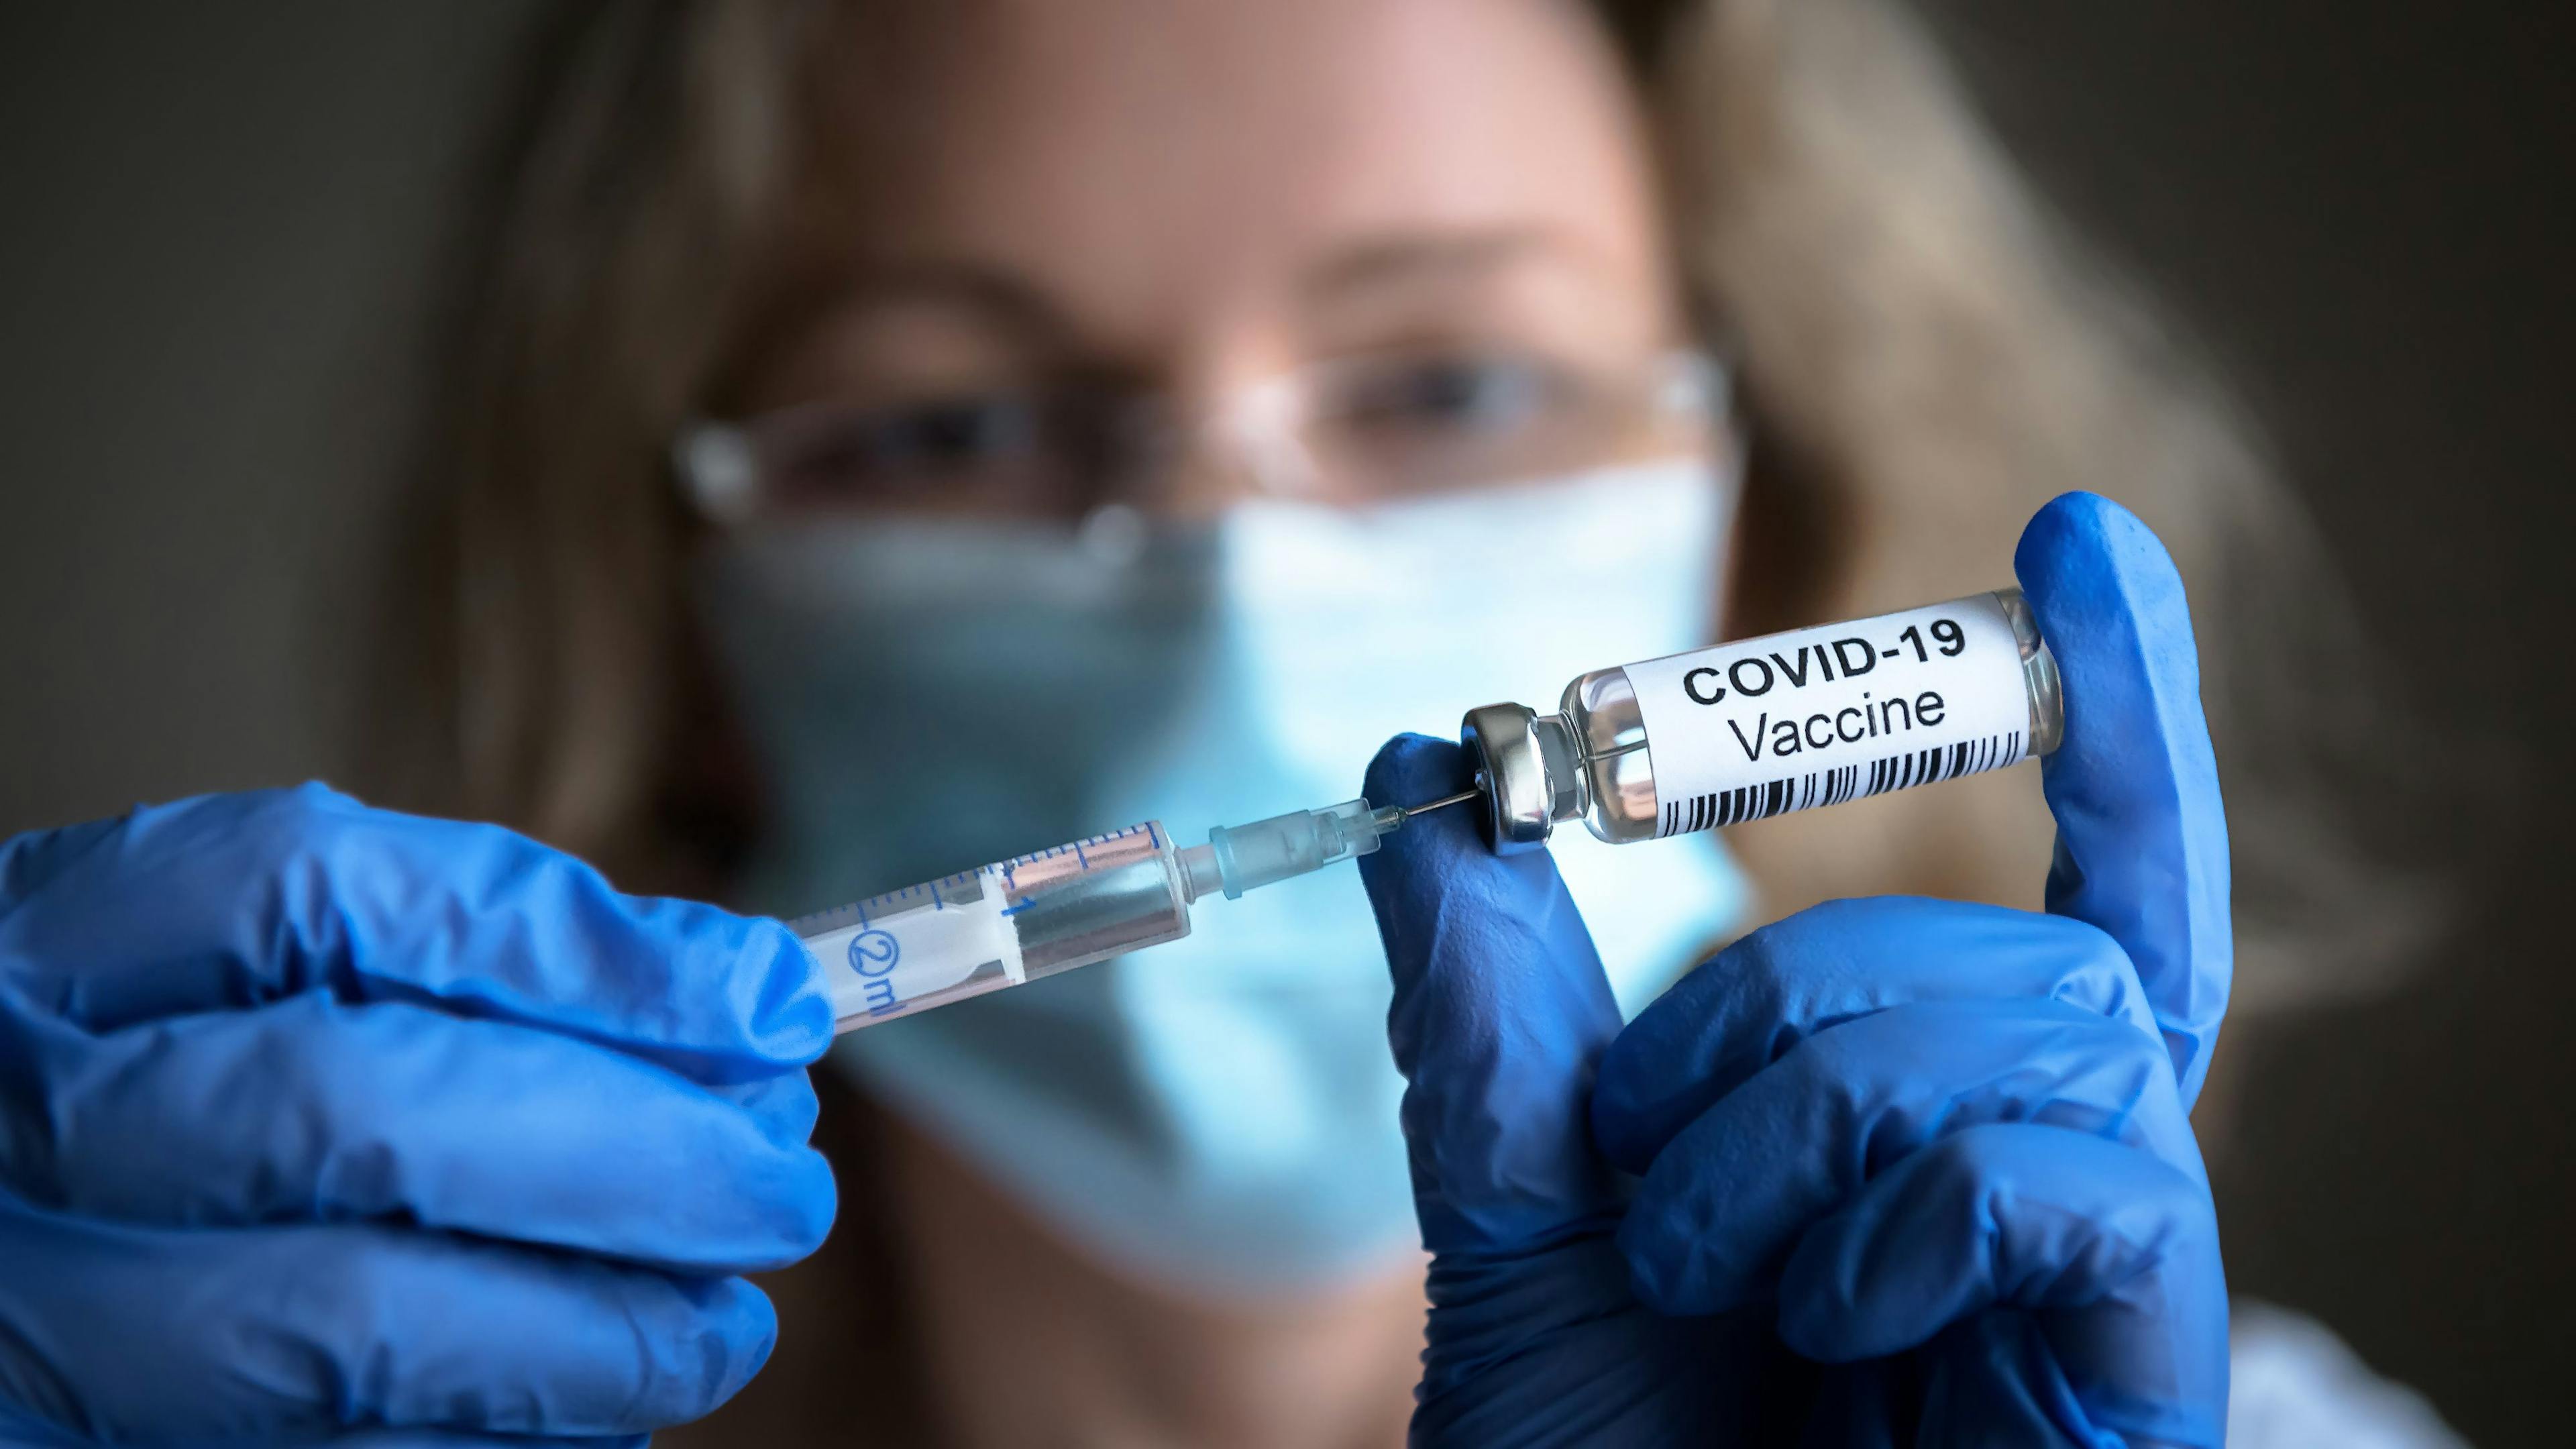 WHO reverses position on COVID-19 vaccines